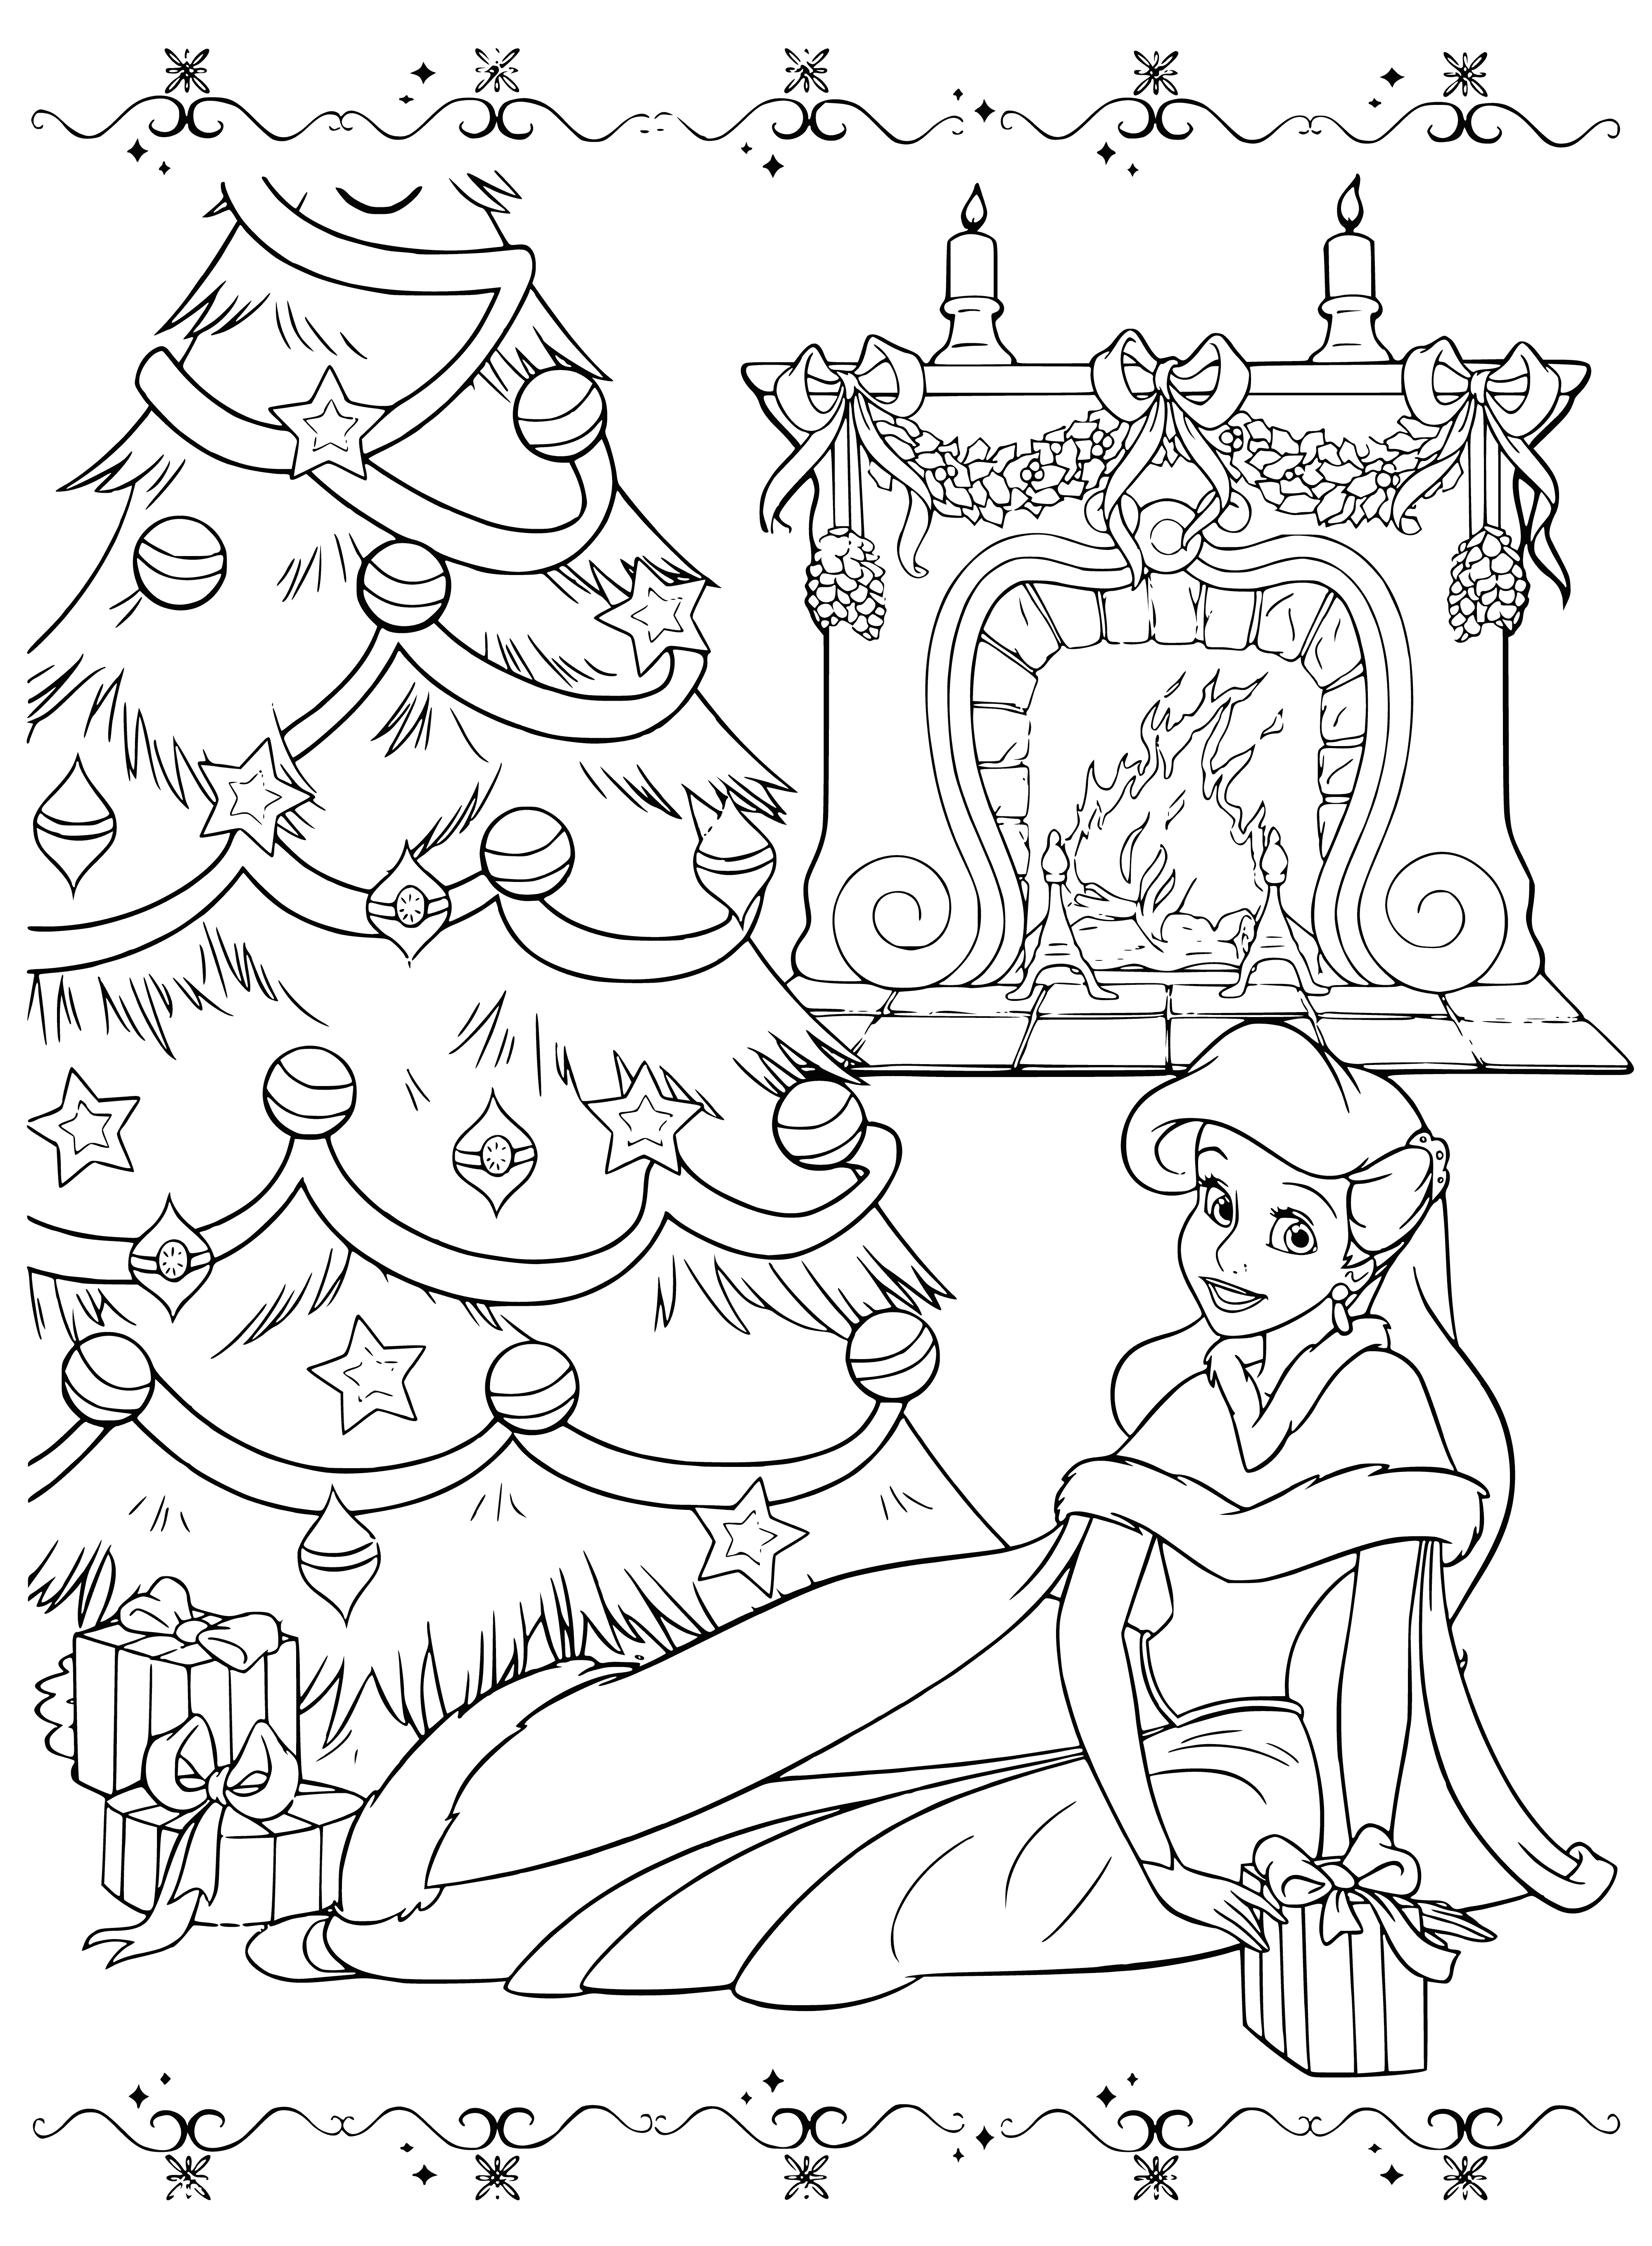 Ariel at the Christmas tree coloring page